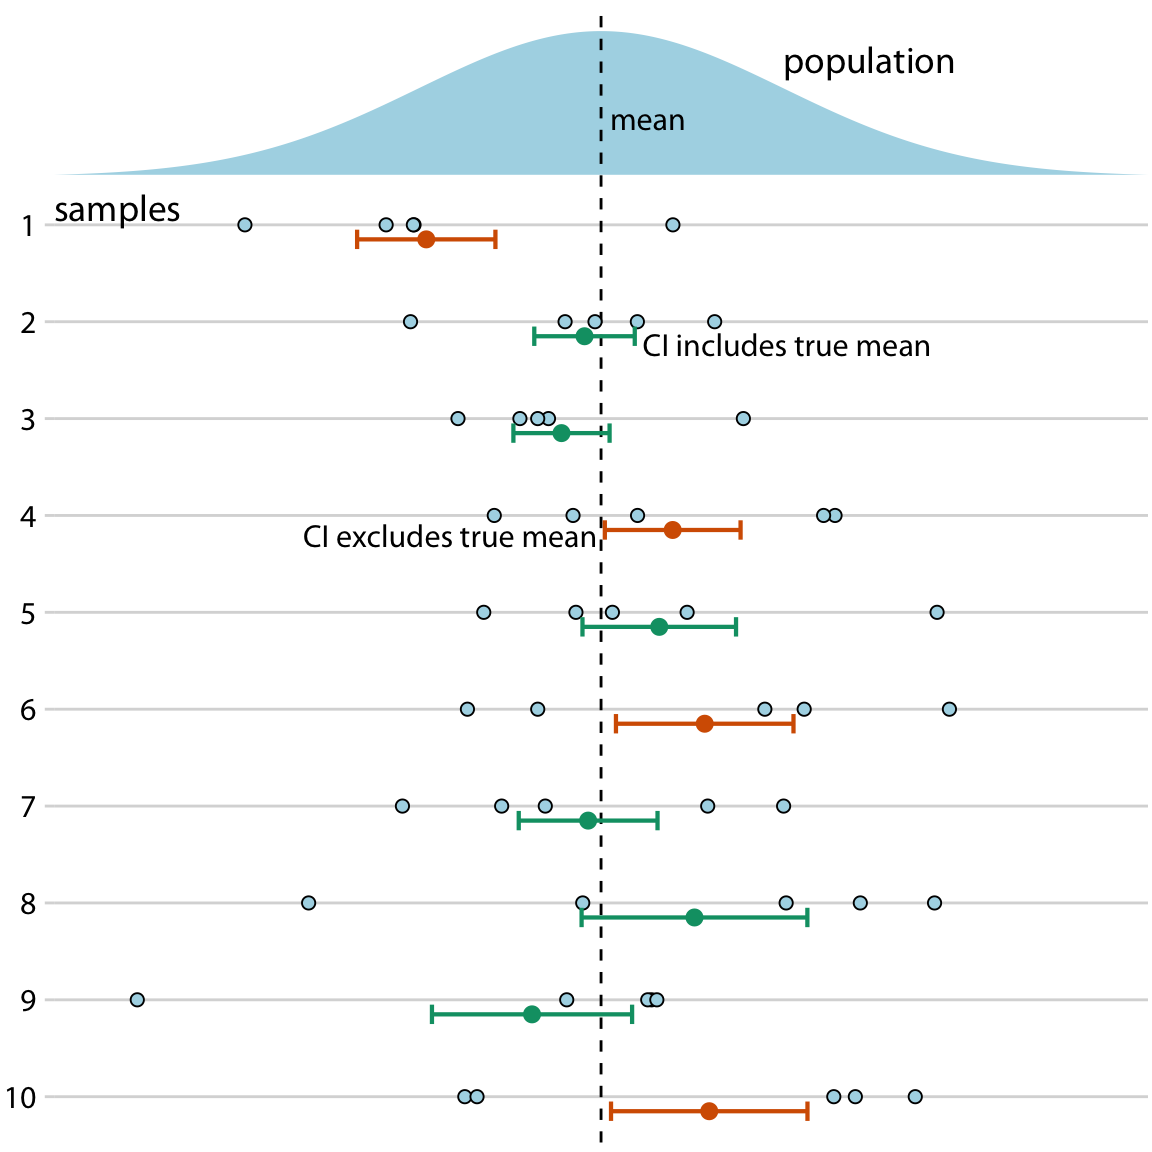 Frequency interpretation of a confidence interval. Confidence intervals (CIs) are best understood in the context of repeated sampling. For each sample, a specific confidence interval either includes or excludes the true parameter, here the mean. However, if we sample repeatedly, then the confidence intervals (shown here are 68% confidence intervals, corresponding to sample mean +/- standard error) include the true mean approximately 68% of the time.